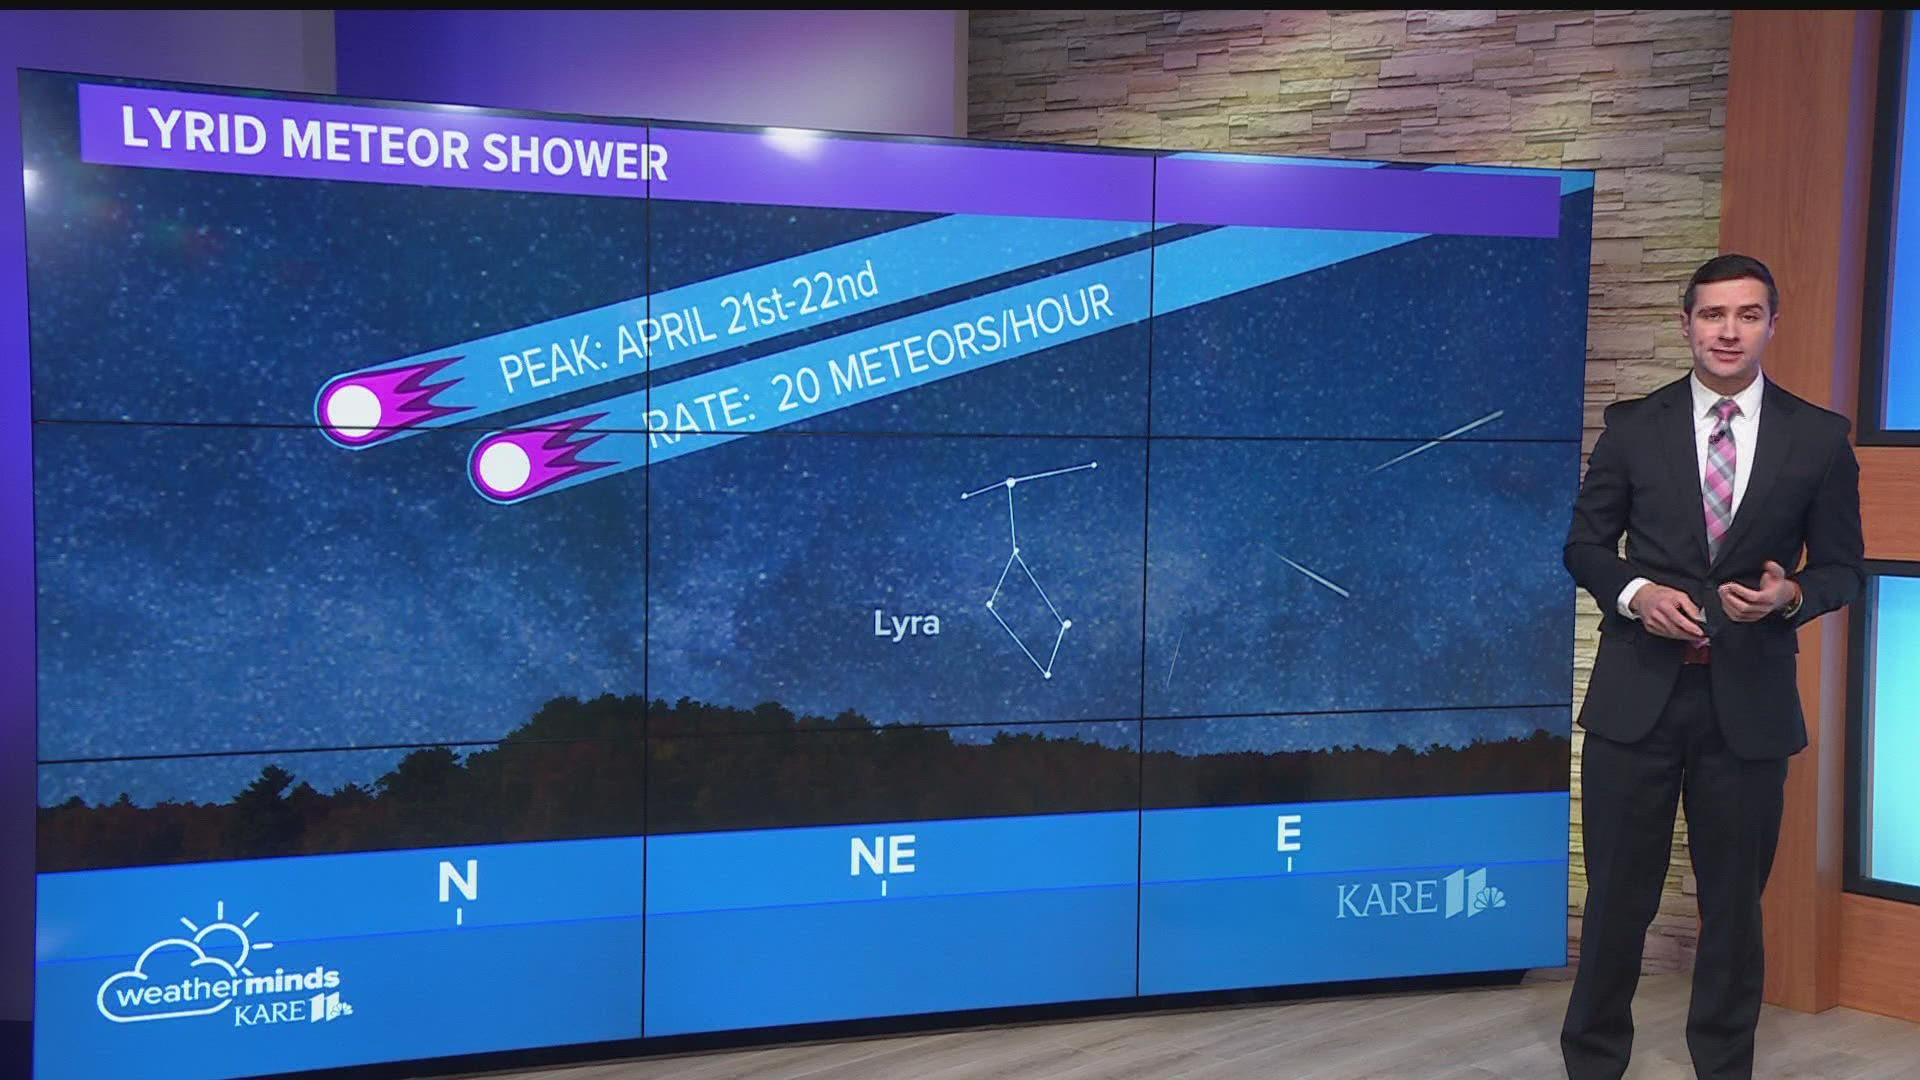 This week, four planets have lined up and are visible on the eastern horizon just before dawn. The Lyrid meteor shower will peak later this week.